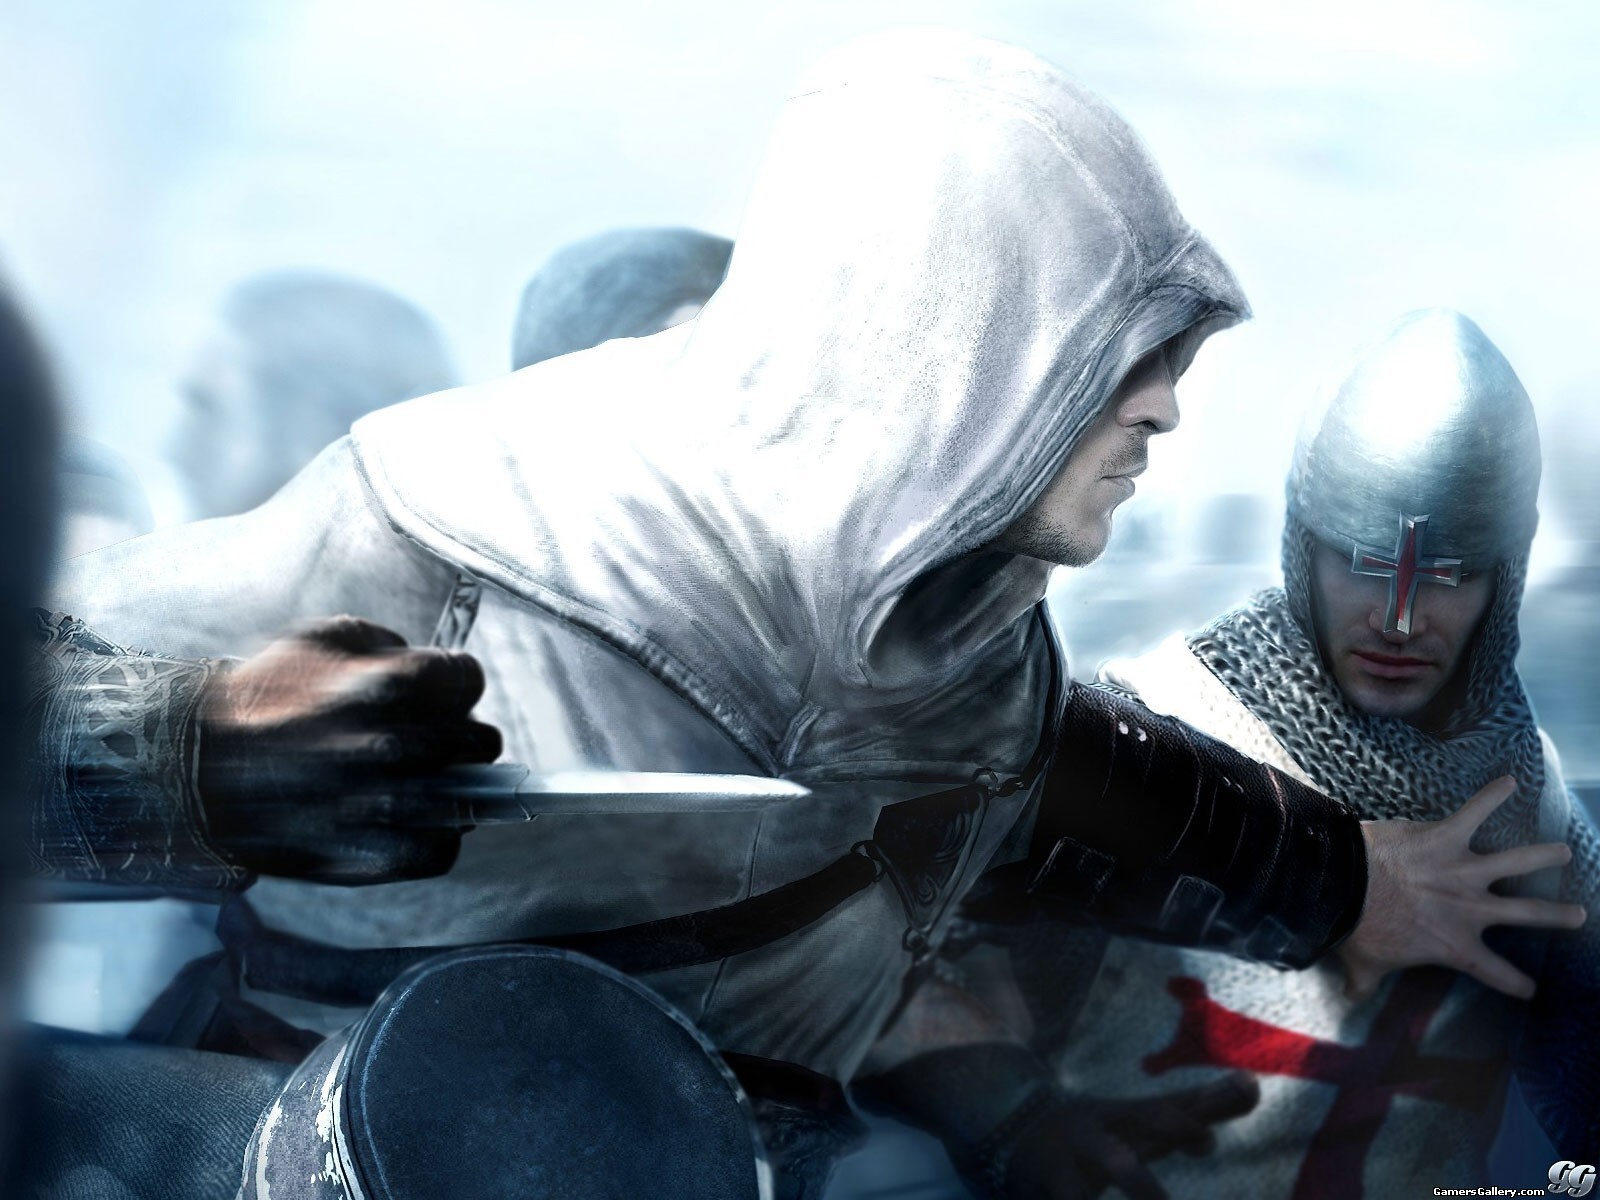 20 Great Assassins Creed Wallpapers 1600x1200